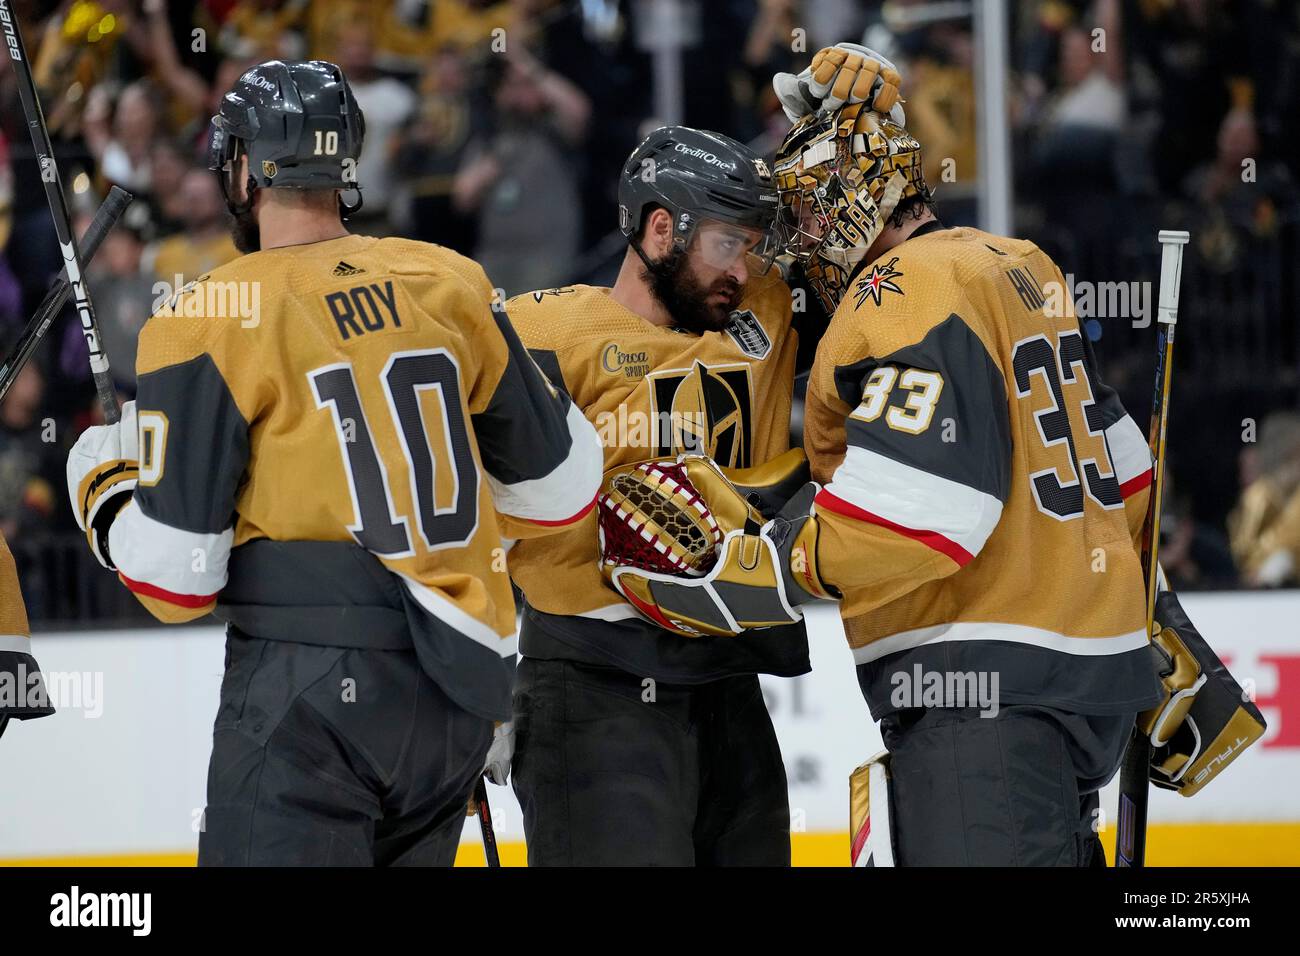 Golden Knights defeat Panthers to take 2-0 lead in Stanley Cup Finals